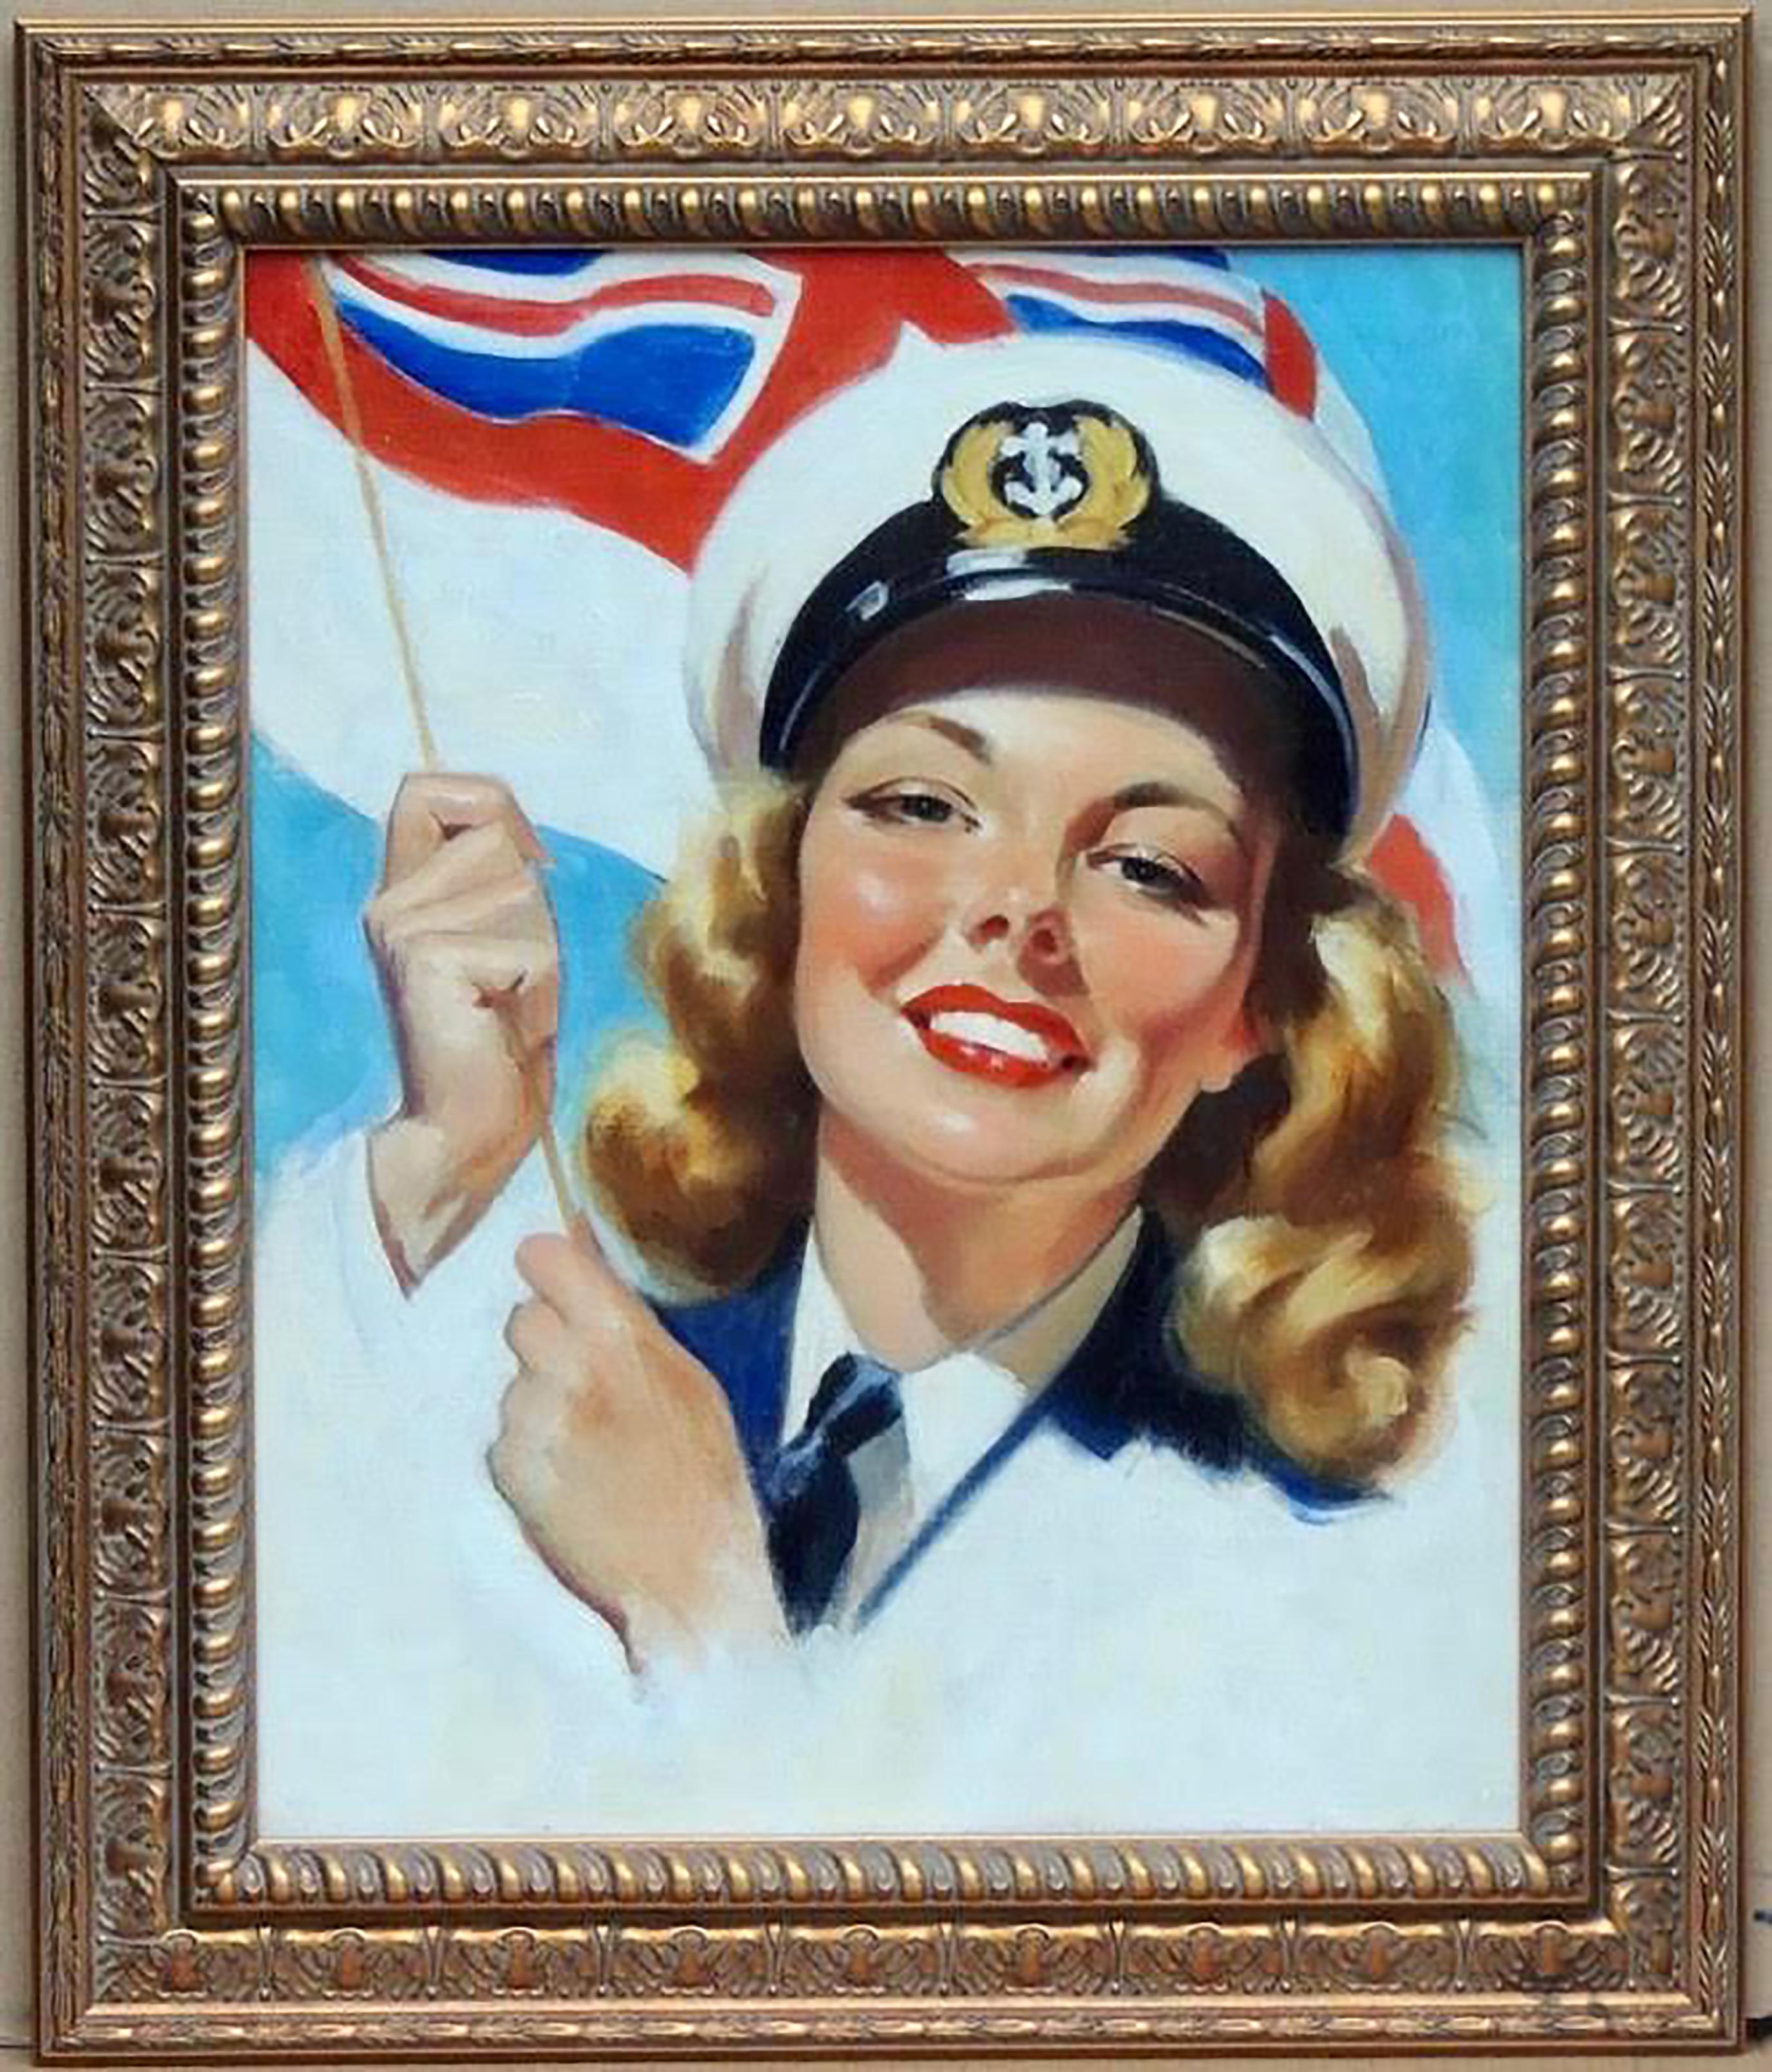 Player's Navy Cut Cigarette Advertisement - Painting by Bradshaw Crandell